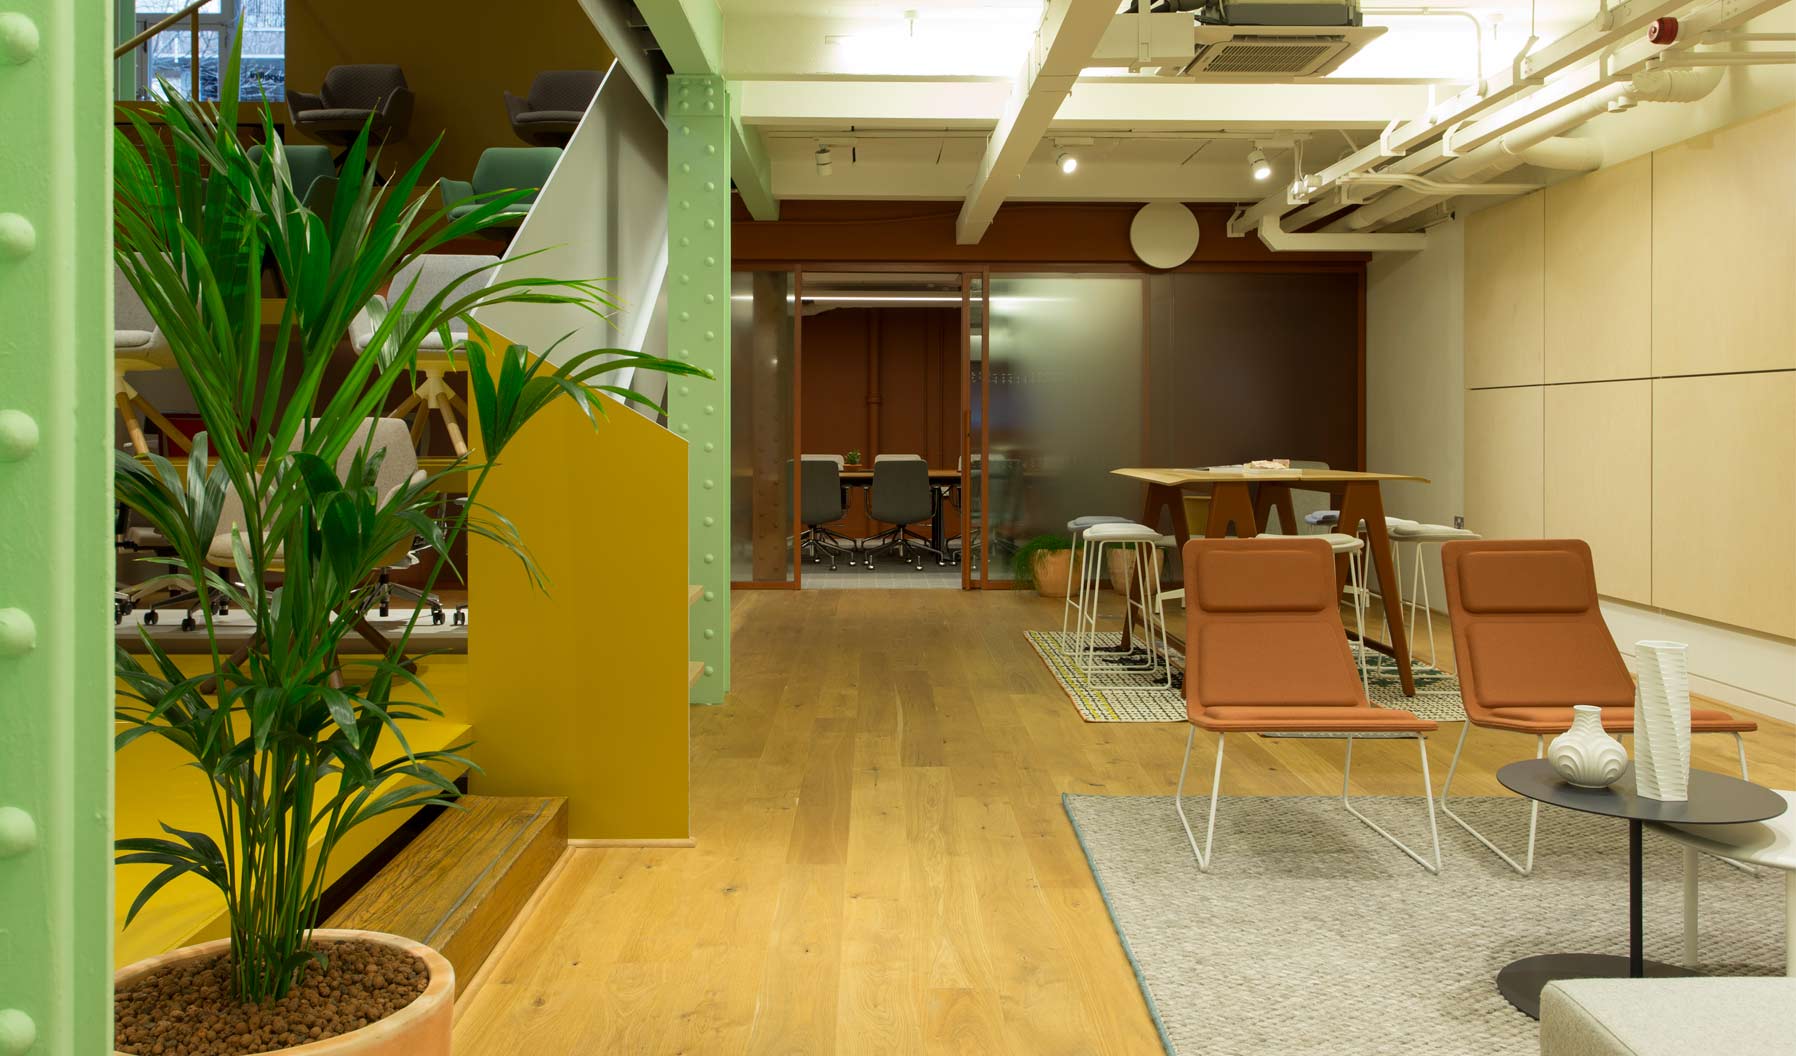 London's downstairs area includes lounge, collaboration and conference room settings.